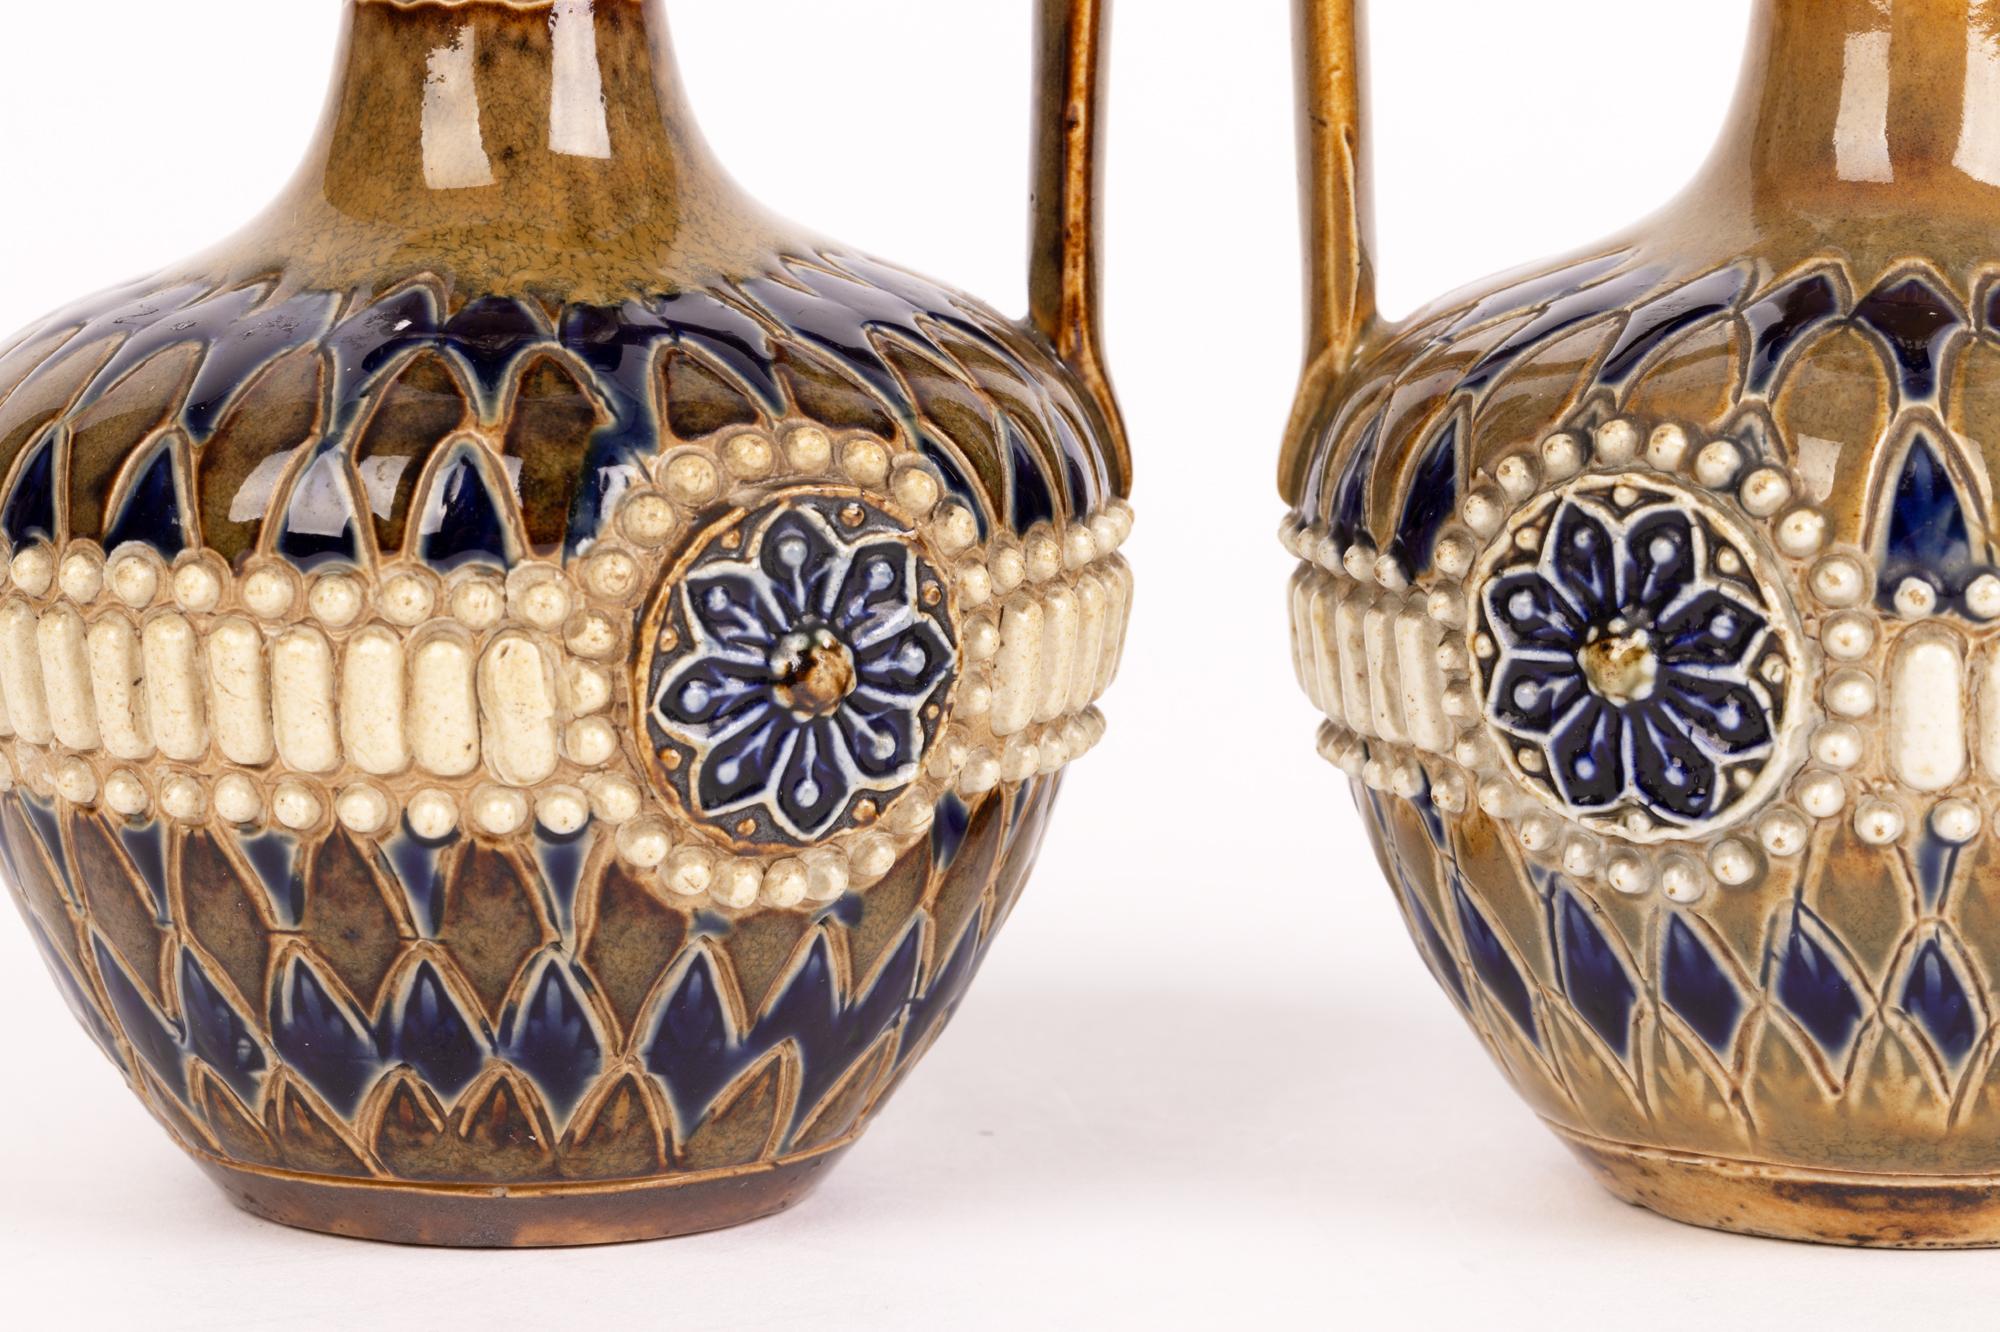 A good and decorative pair antique Doulton Lambeth stoneware jugs decorated with stylized floral designs by Annie Cupit and Florence Dennis and dating from around 1891. The jugs stand on a flat unglazed base with squat bulbous rounded bodies, a